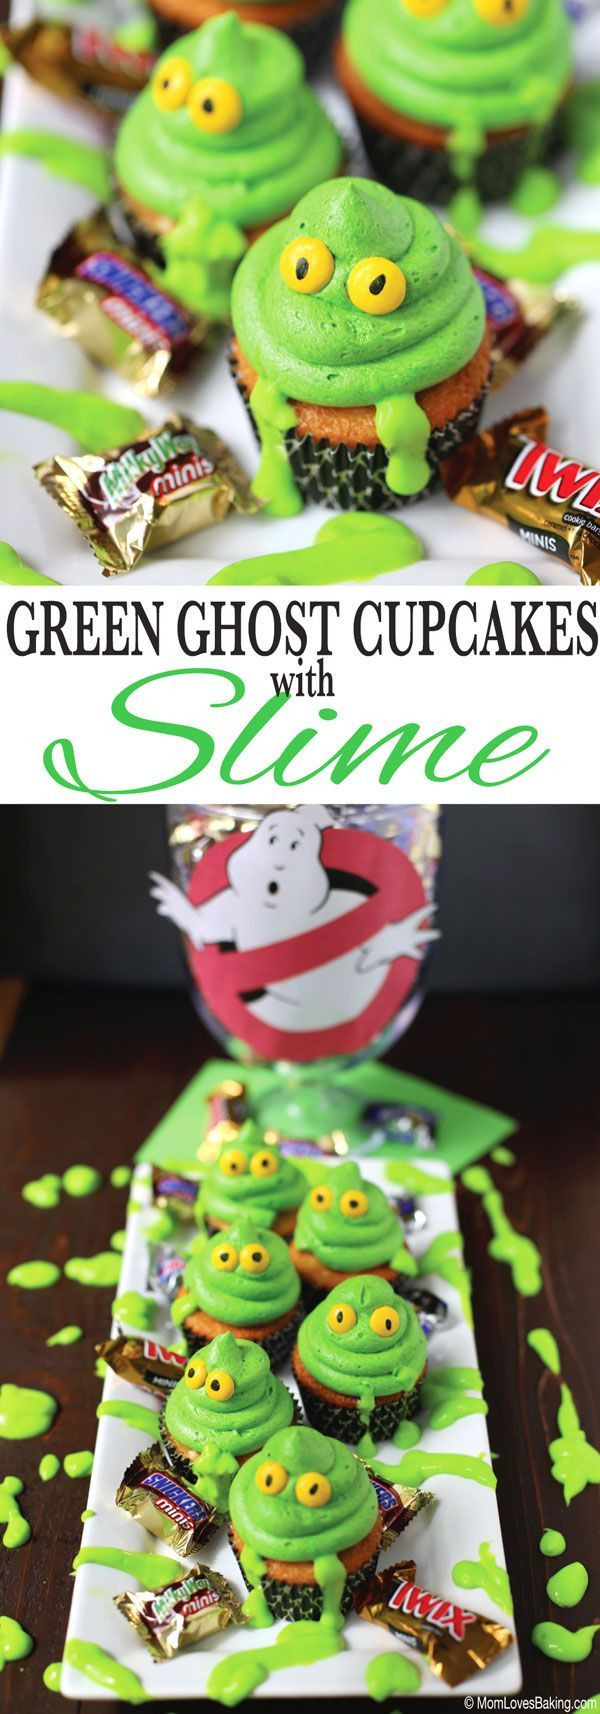 Walmart Halloween Cupcakes
 Green Ghost Cupcakes with Slime Recipe